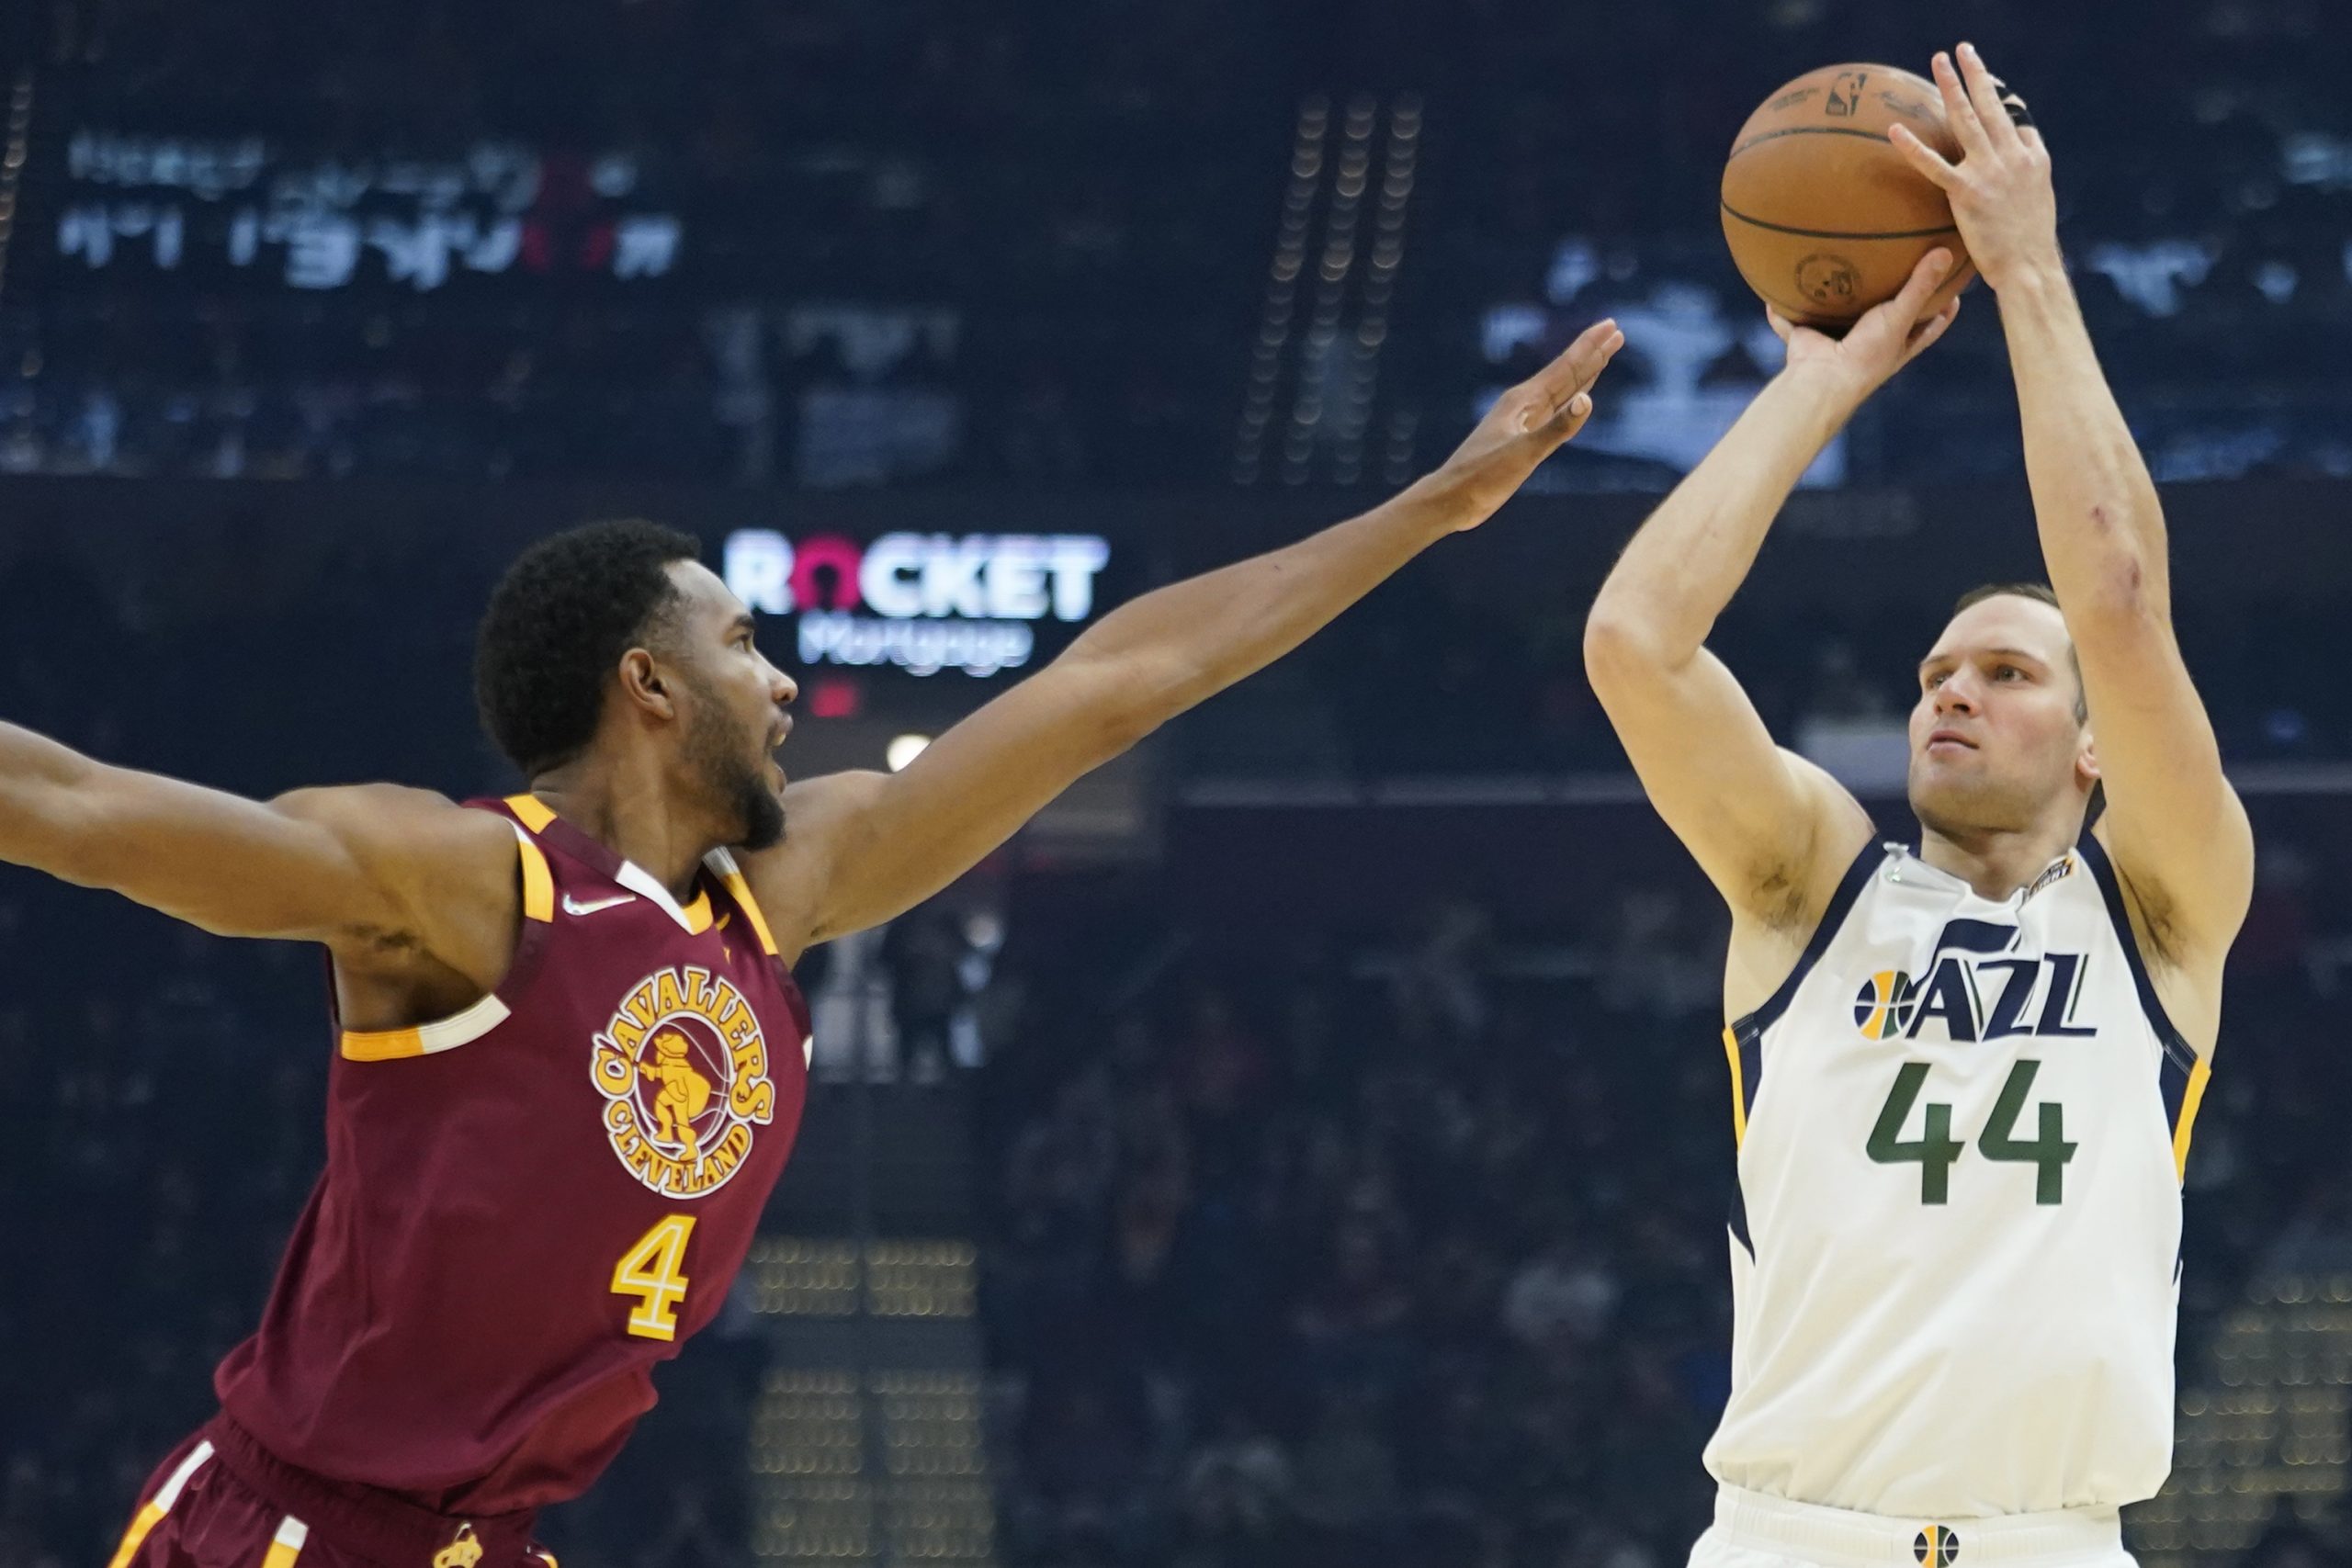 Utah Jazz's Bojan Bogdanovic (44) shoots over Cleveland Cavaliers' Evan Mobley (4) in the first half of an NBA basketball game, Sunday, Dec. 5, 2021, in Cleveland. (AP Photo/Tony Dejak)